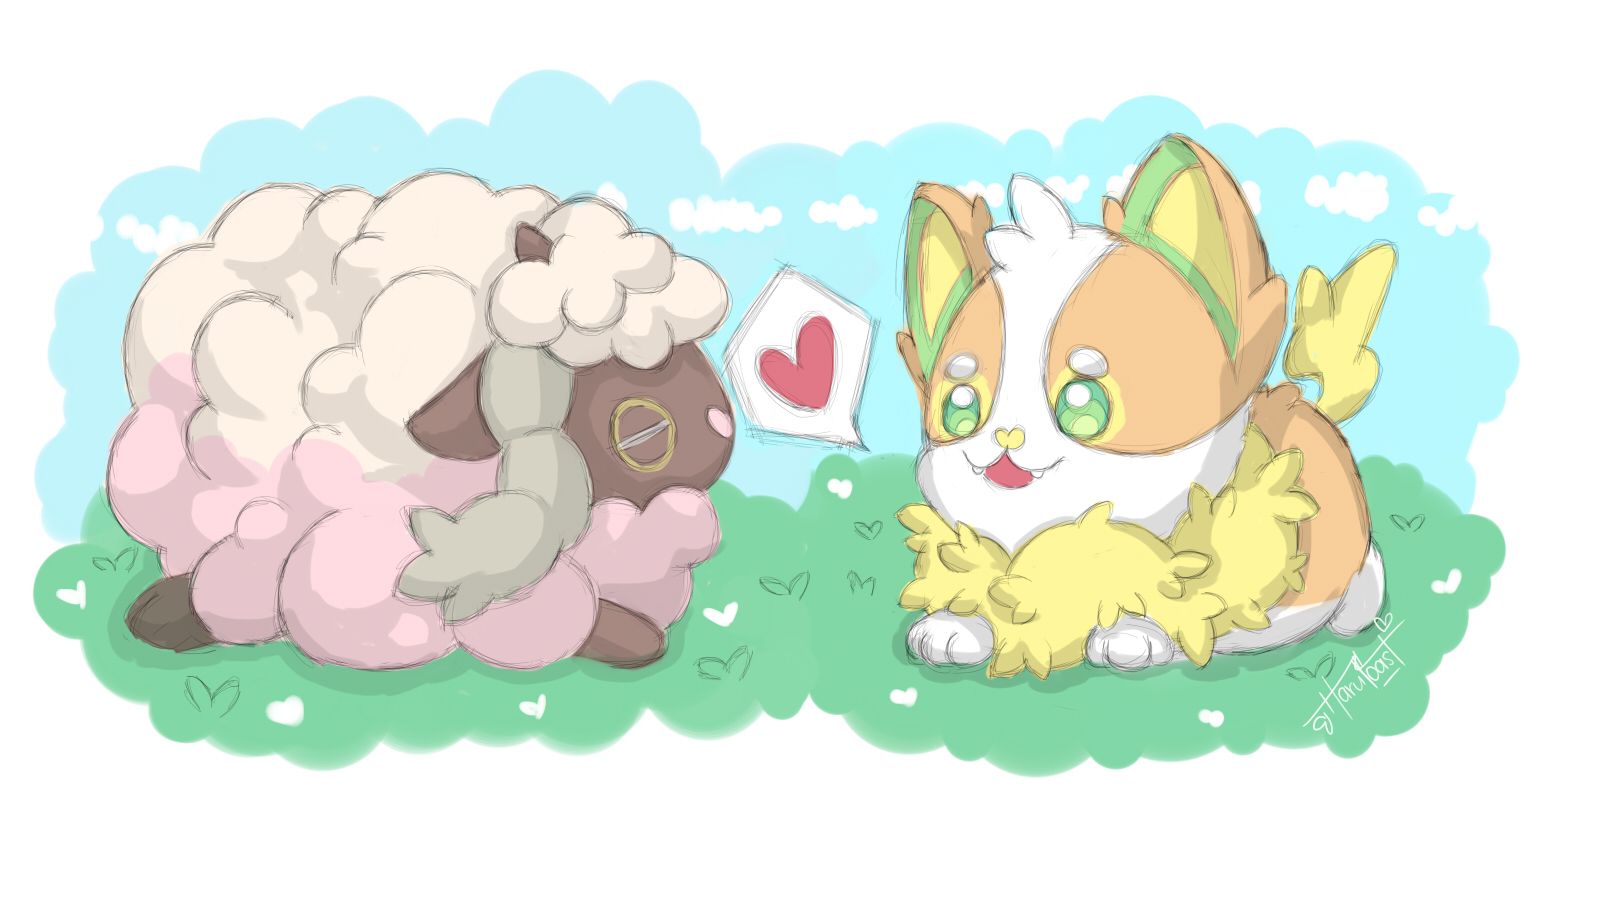 I started with Yamper, but I felt that he might be lonely, so I